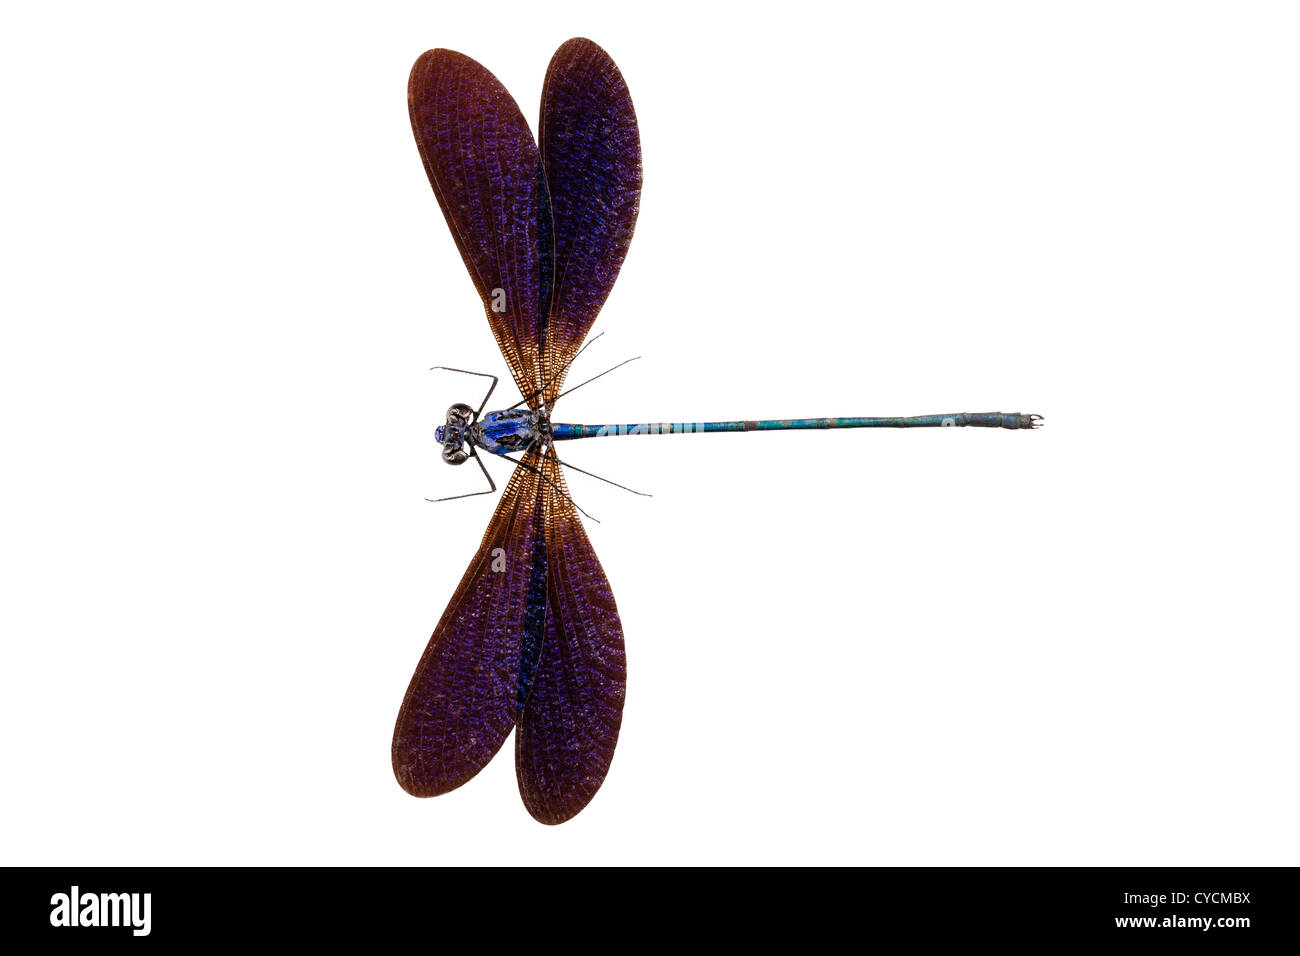 Blue dragonfly species Vestalis luctuosa Stock Photo